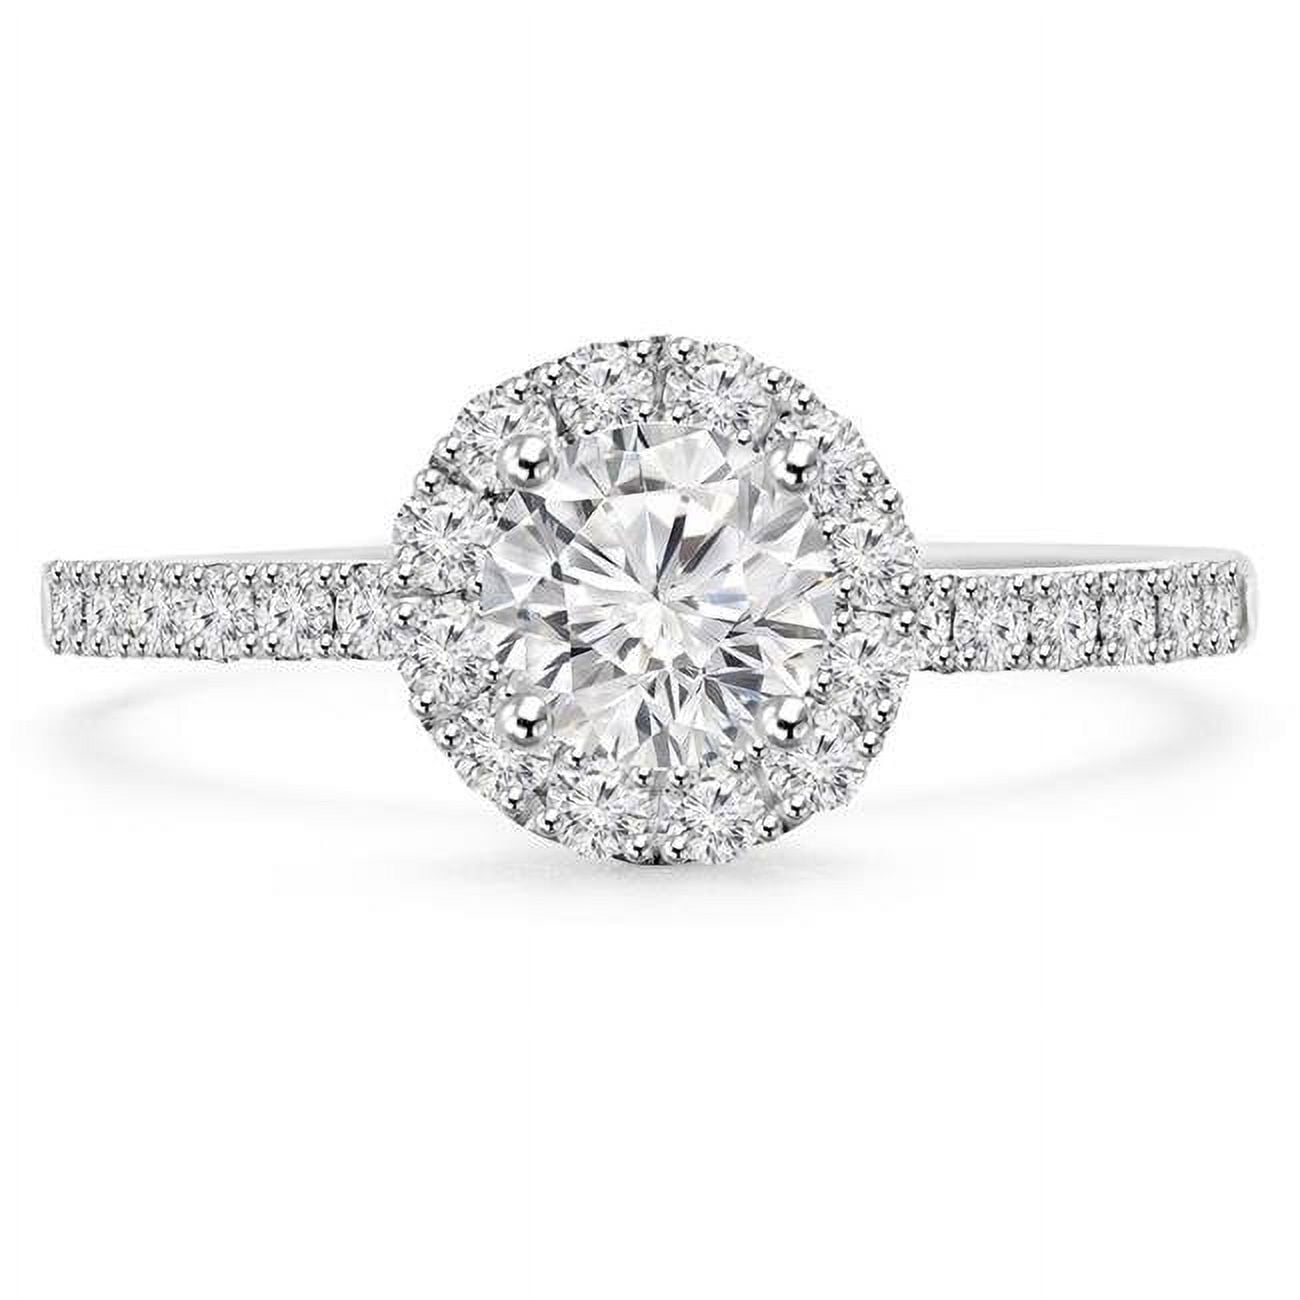 14K Gold Cushion Cut Lab Diamond Solitaire Engagement Ring High Set, 0.5  2.0Cttw, D Vs1, Ideal Wife Christmas Gifts 2022 For Women From Cldwh521,  $108.55 | DHgate.Com